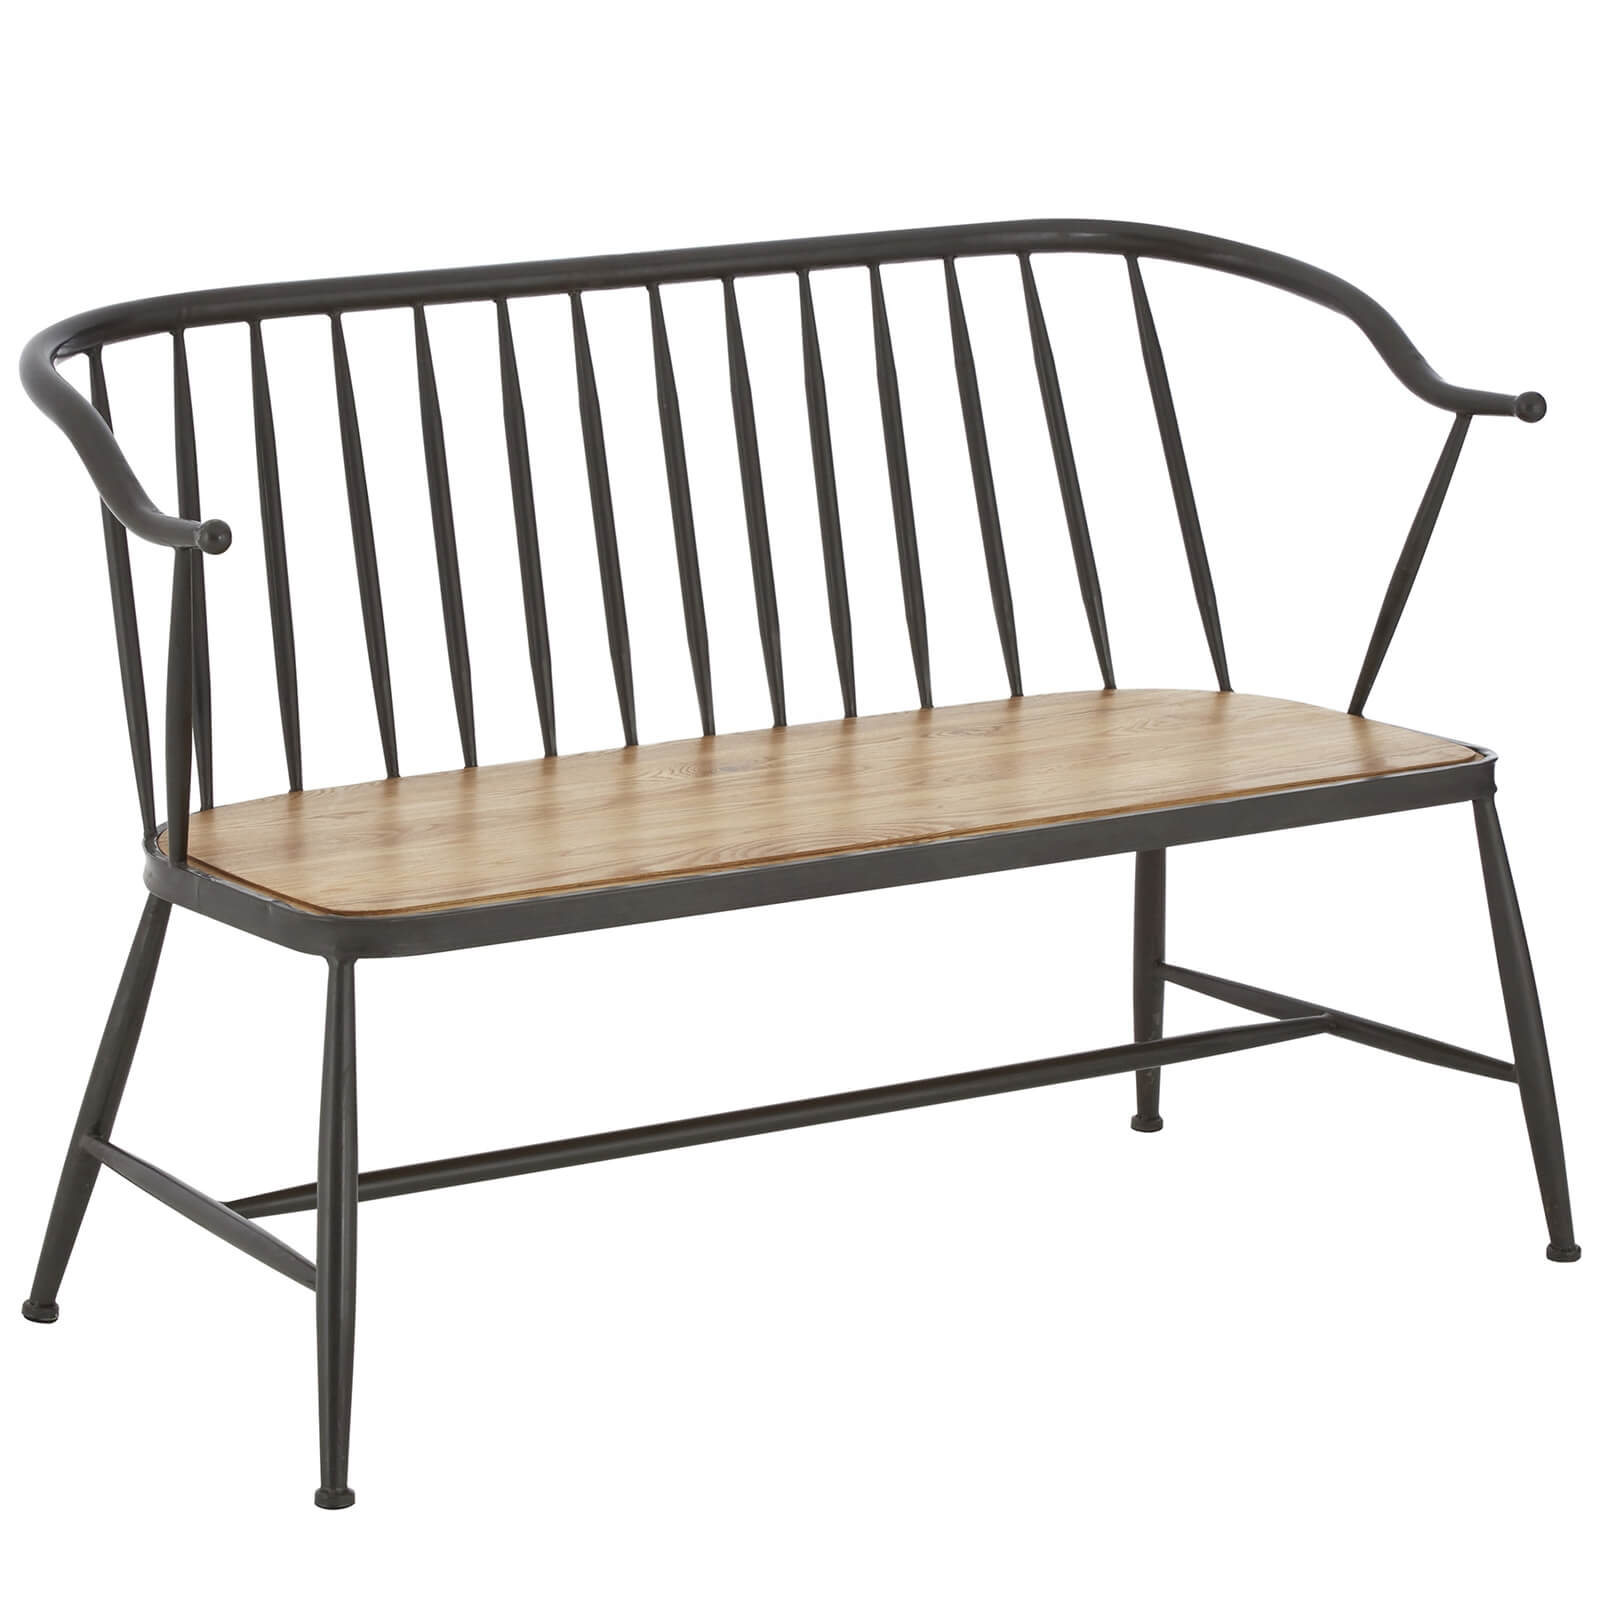 New Foundry Wood and Metal Bench Chair